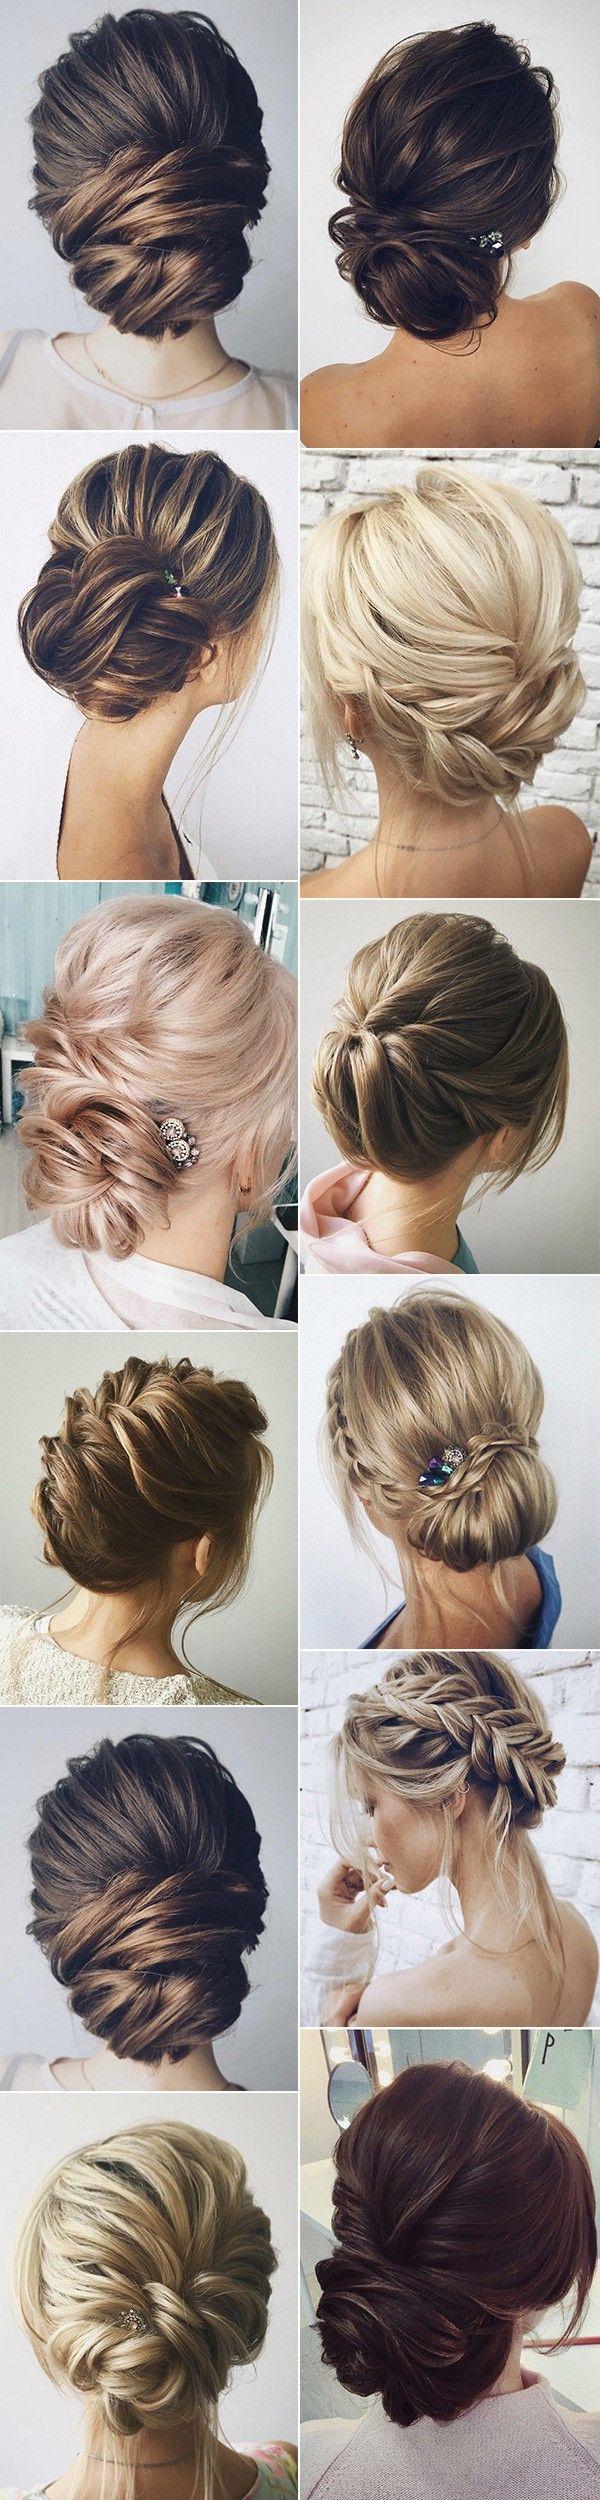 Mariage - 12 Trending Updo Wedding Hairstyles From Instagram